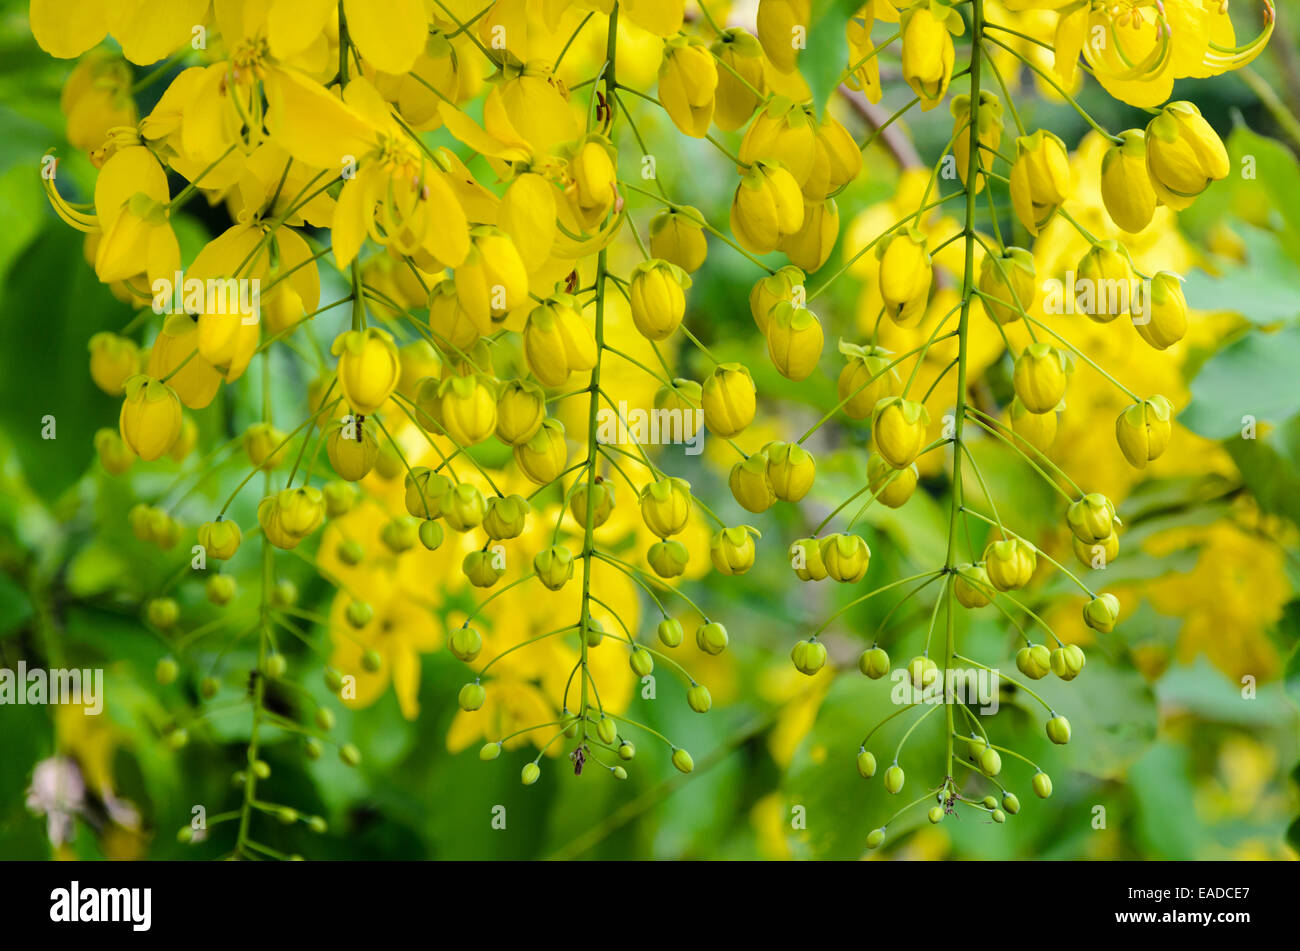 Purging Cassia or Ratchaphruek flowers ( Cassis fistula ) national flower of Thailand with bright yellow beauty Stock Photo